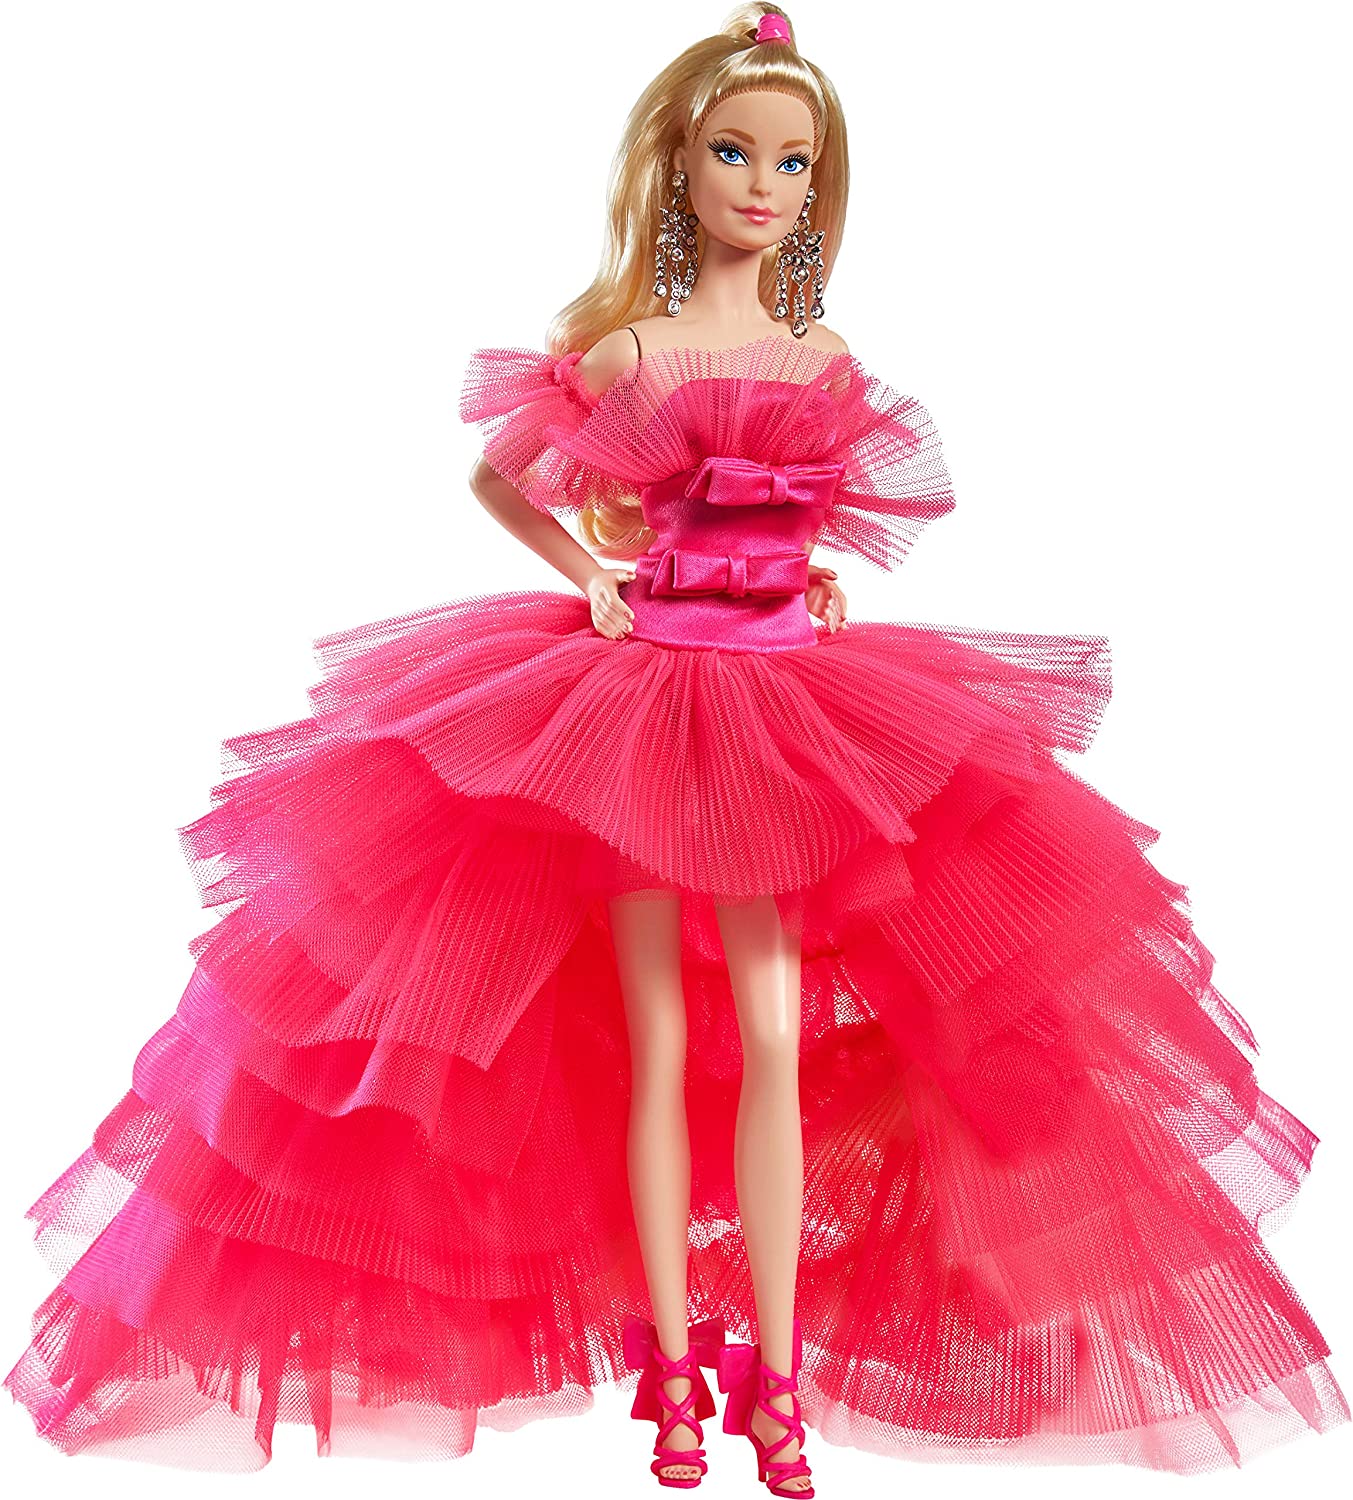 Barbie Signature Pink Collection Doll - YouLoveIt.com